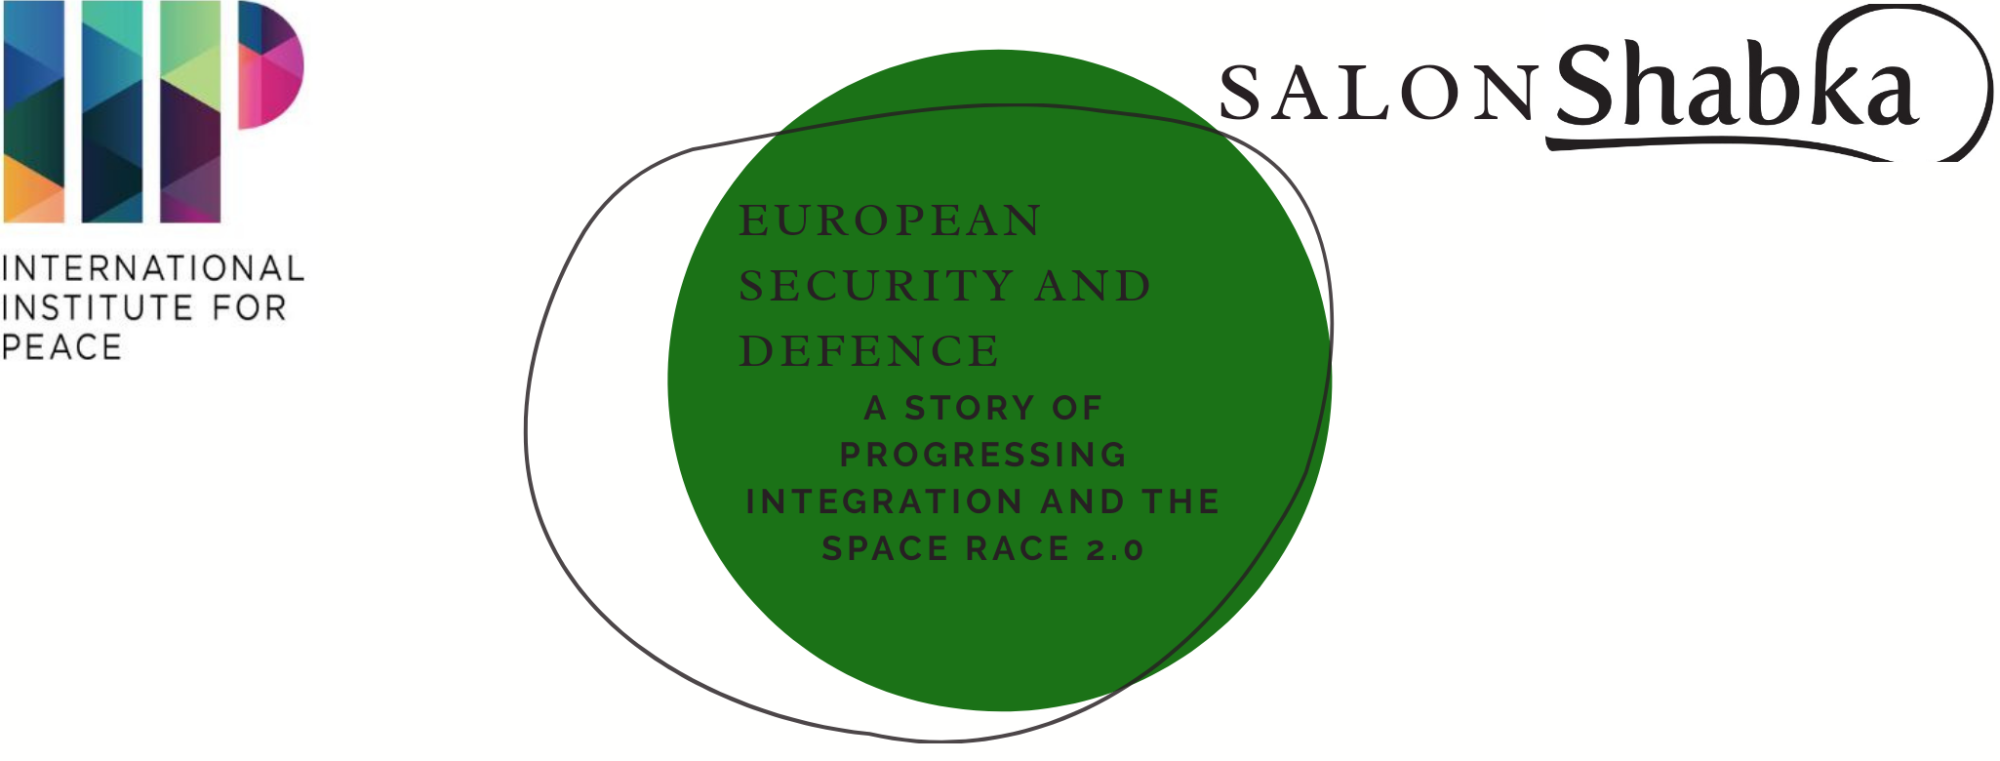 9 October 2020 | Salon Shabka: European Security and Defence: A story of progressing integration and the Space Race 2.0 1